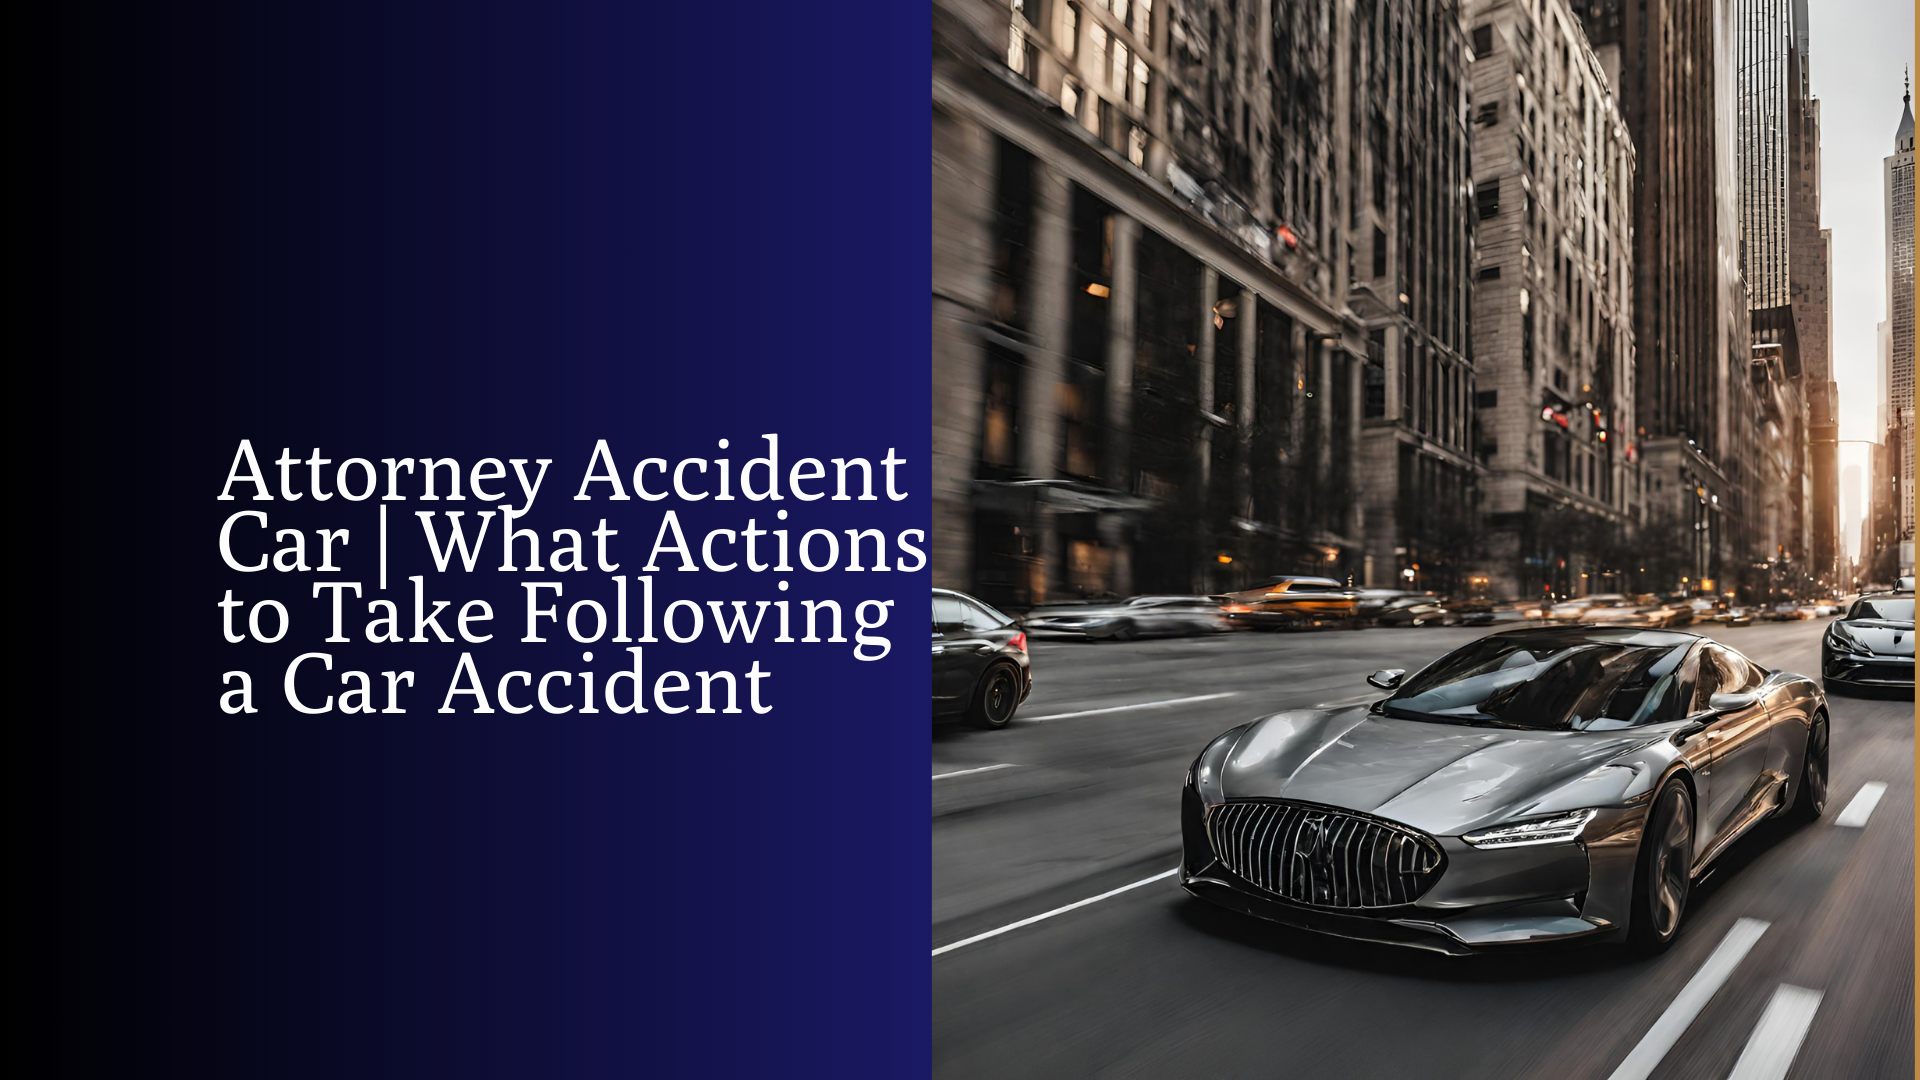 Attorney-Accident-Car-What-Actions-to-Take-Following-a-Car-Accident